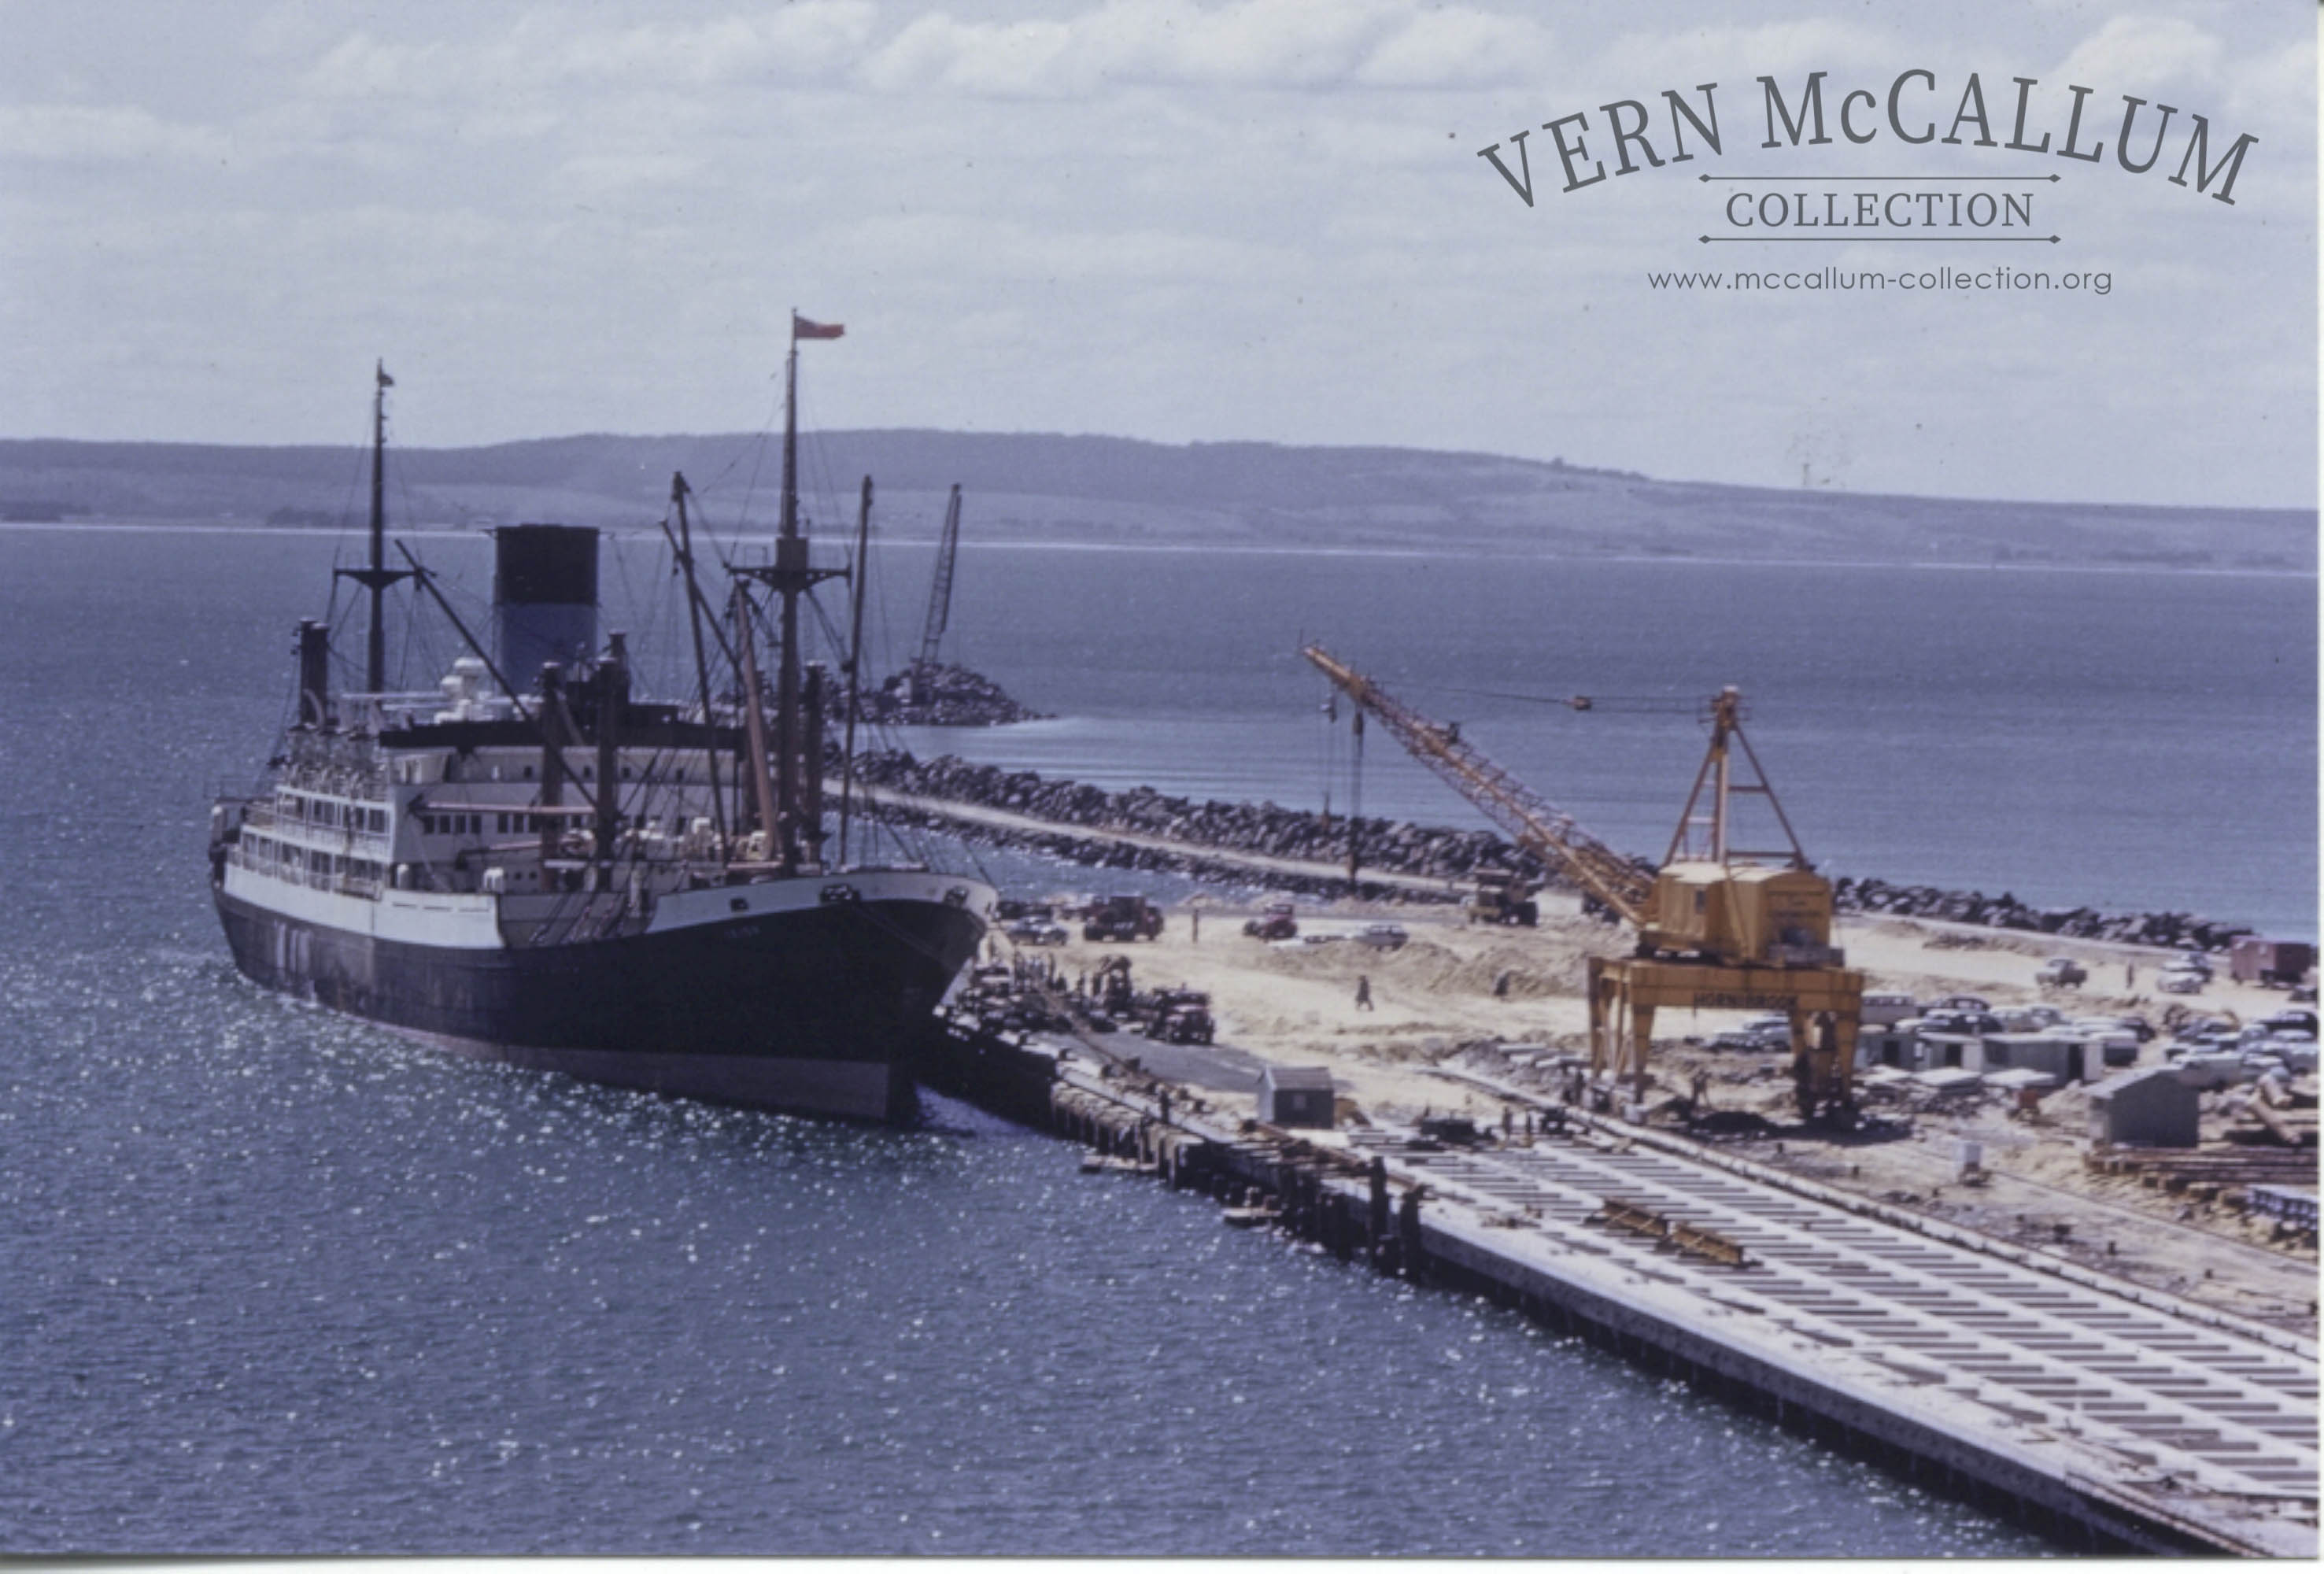 The first ship to use the partly constructed wharf. A large Generator that was transported to the Paper mill at Millicent.